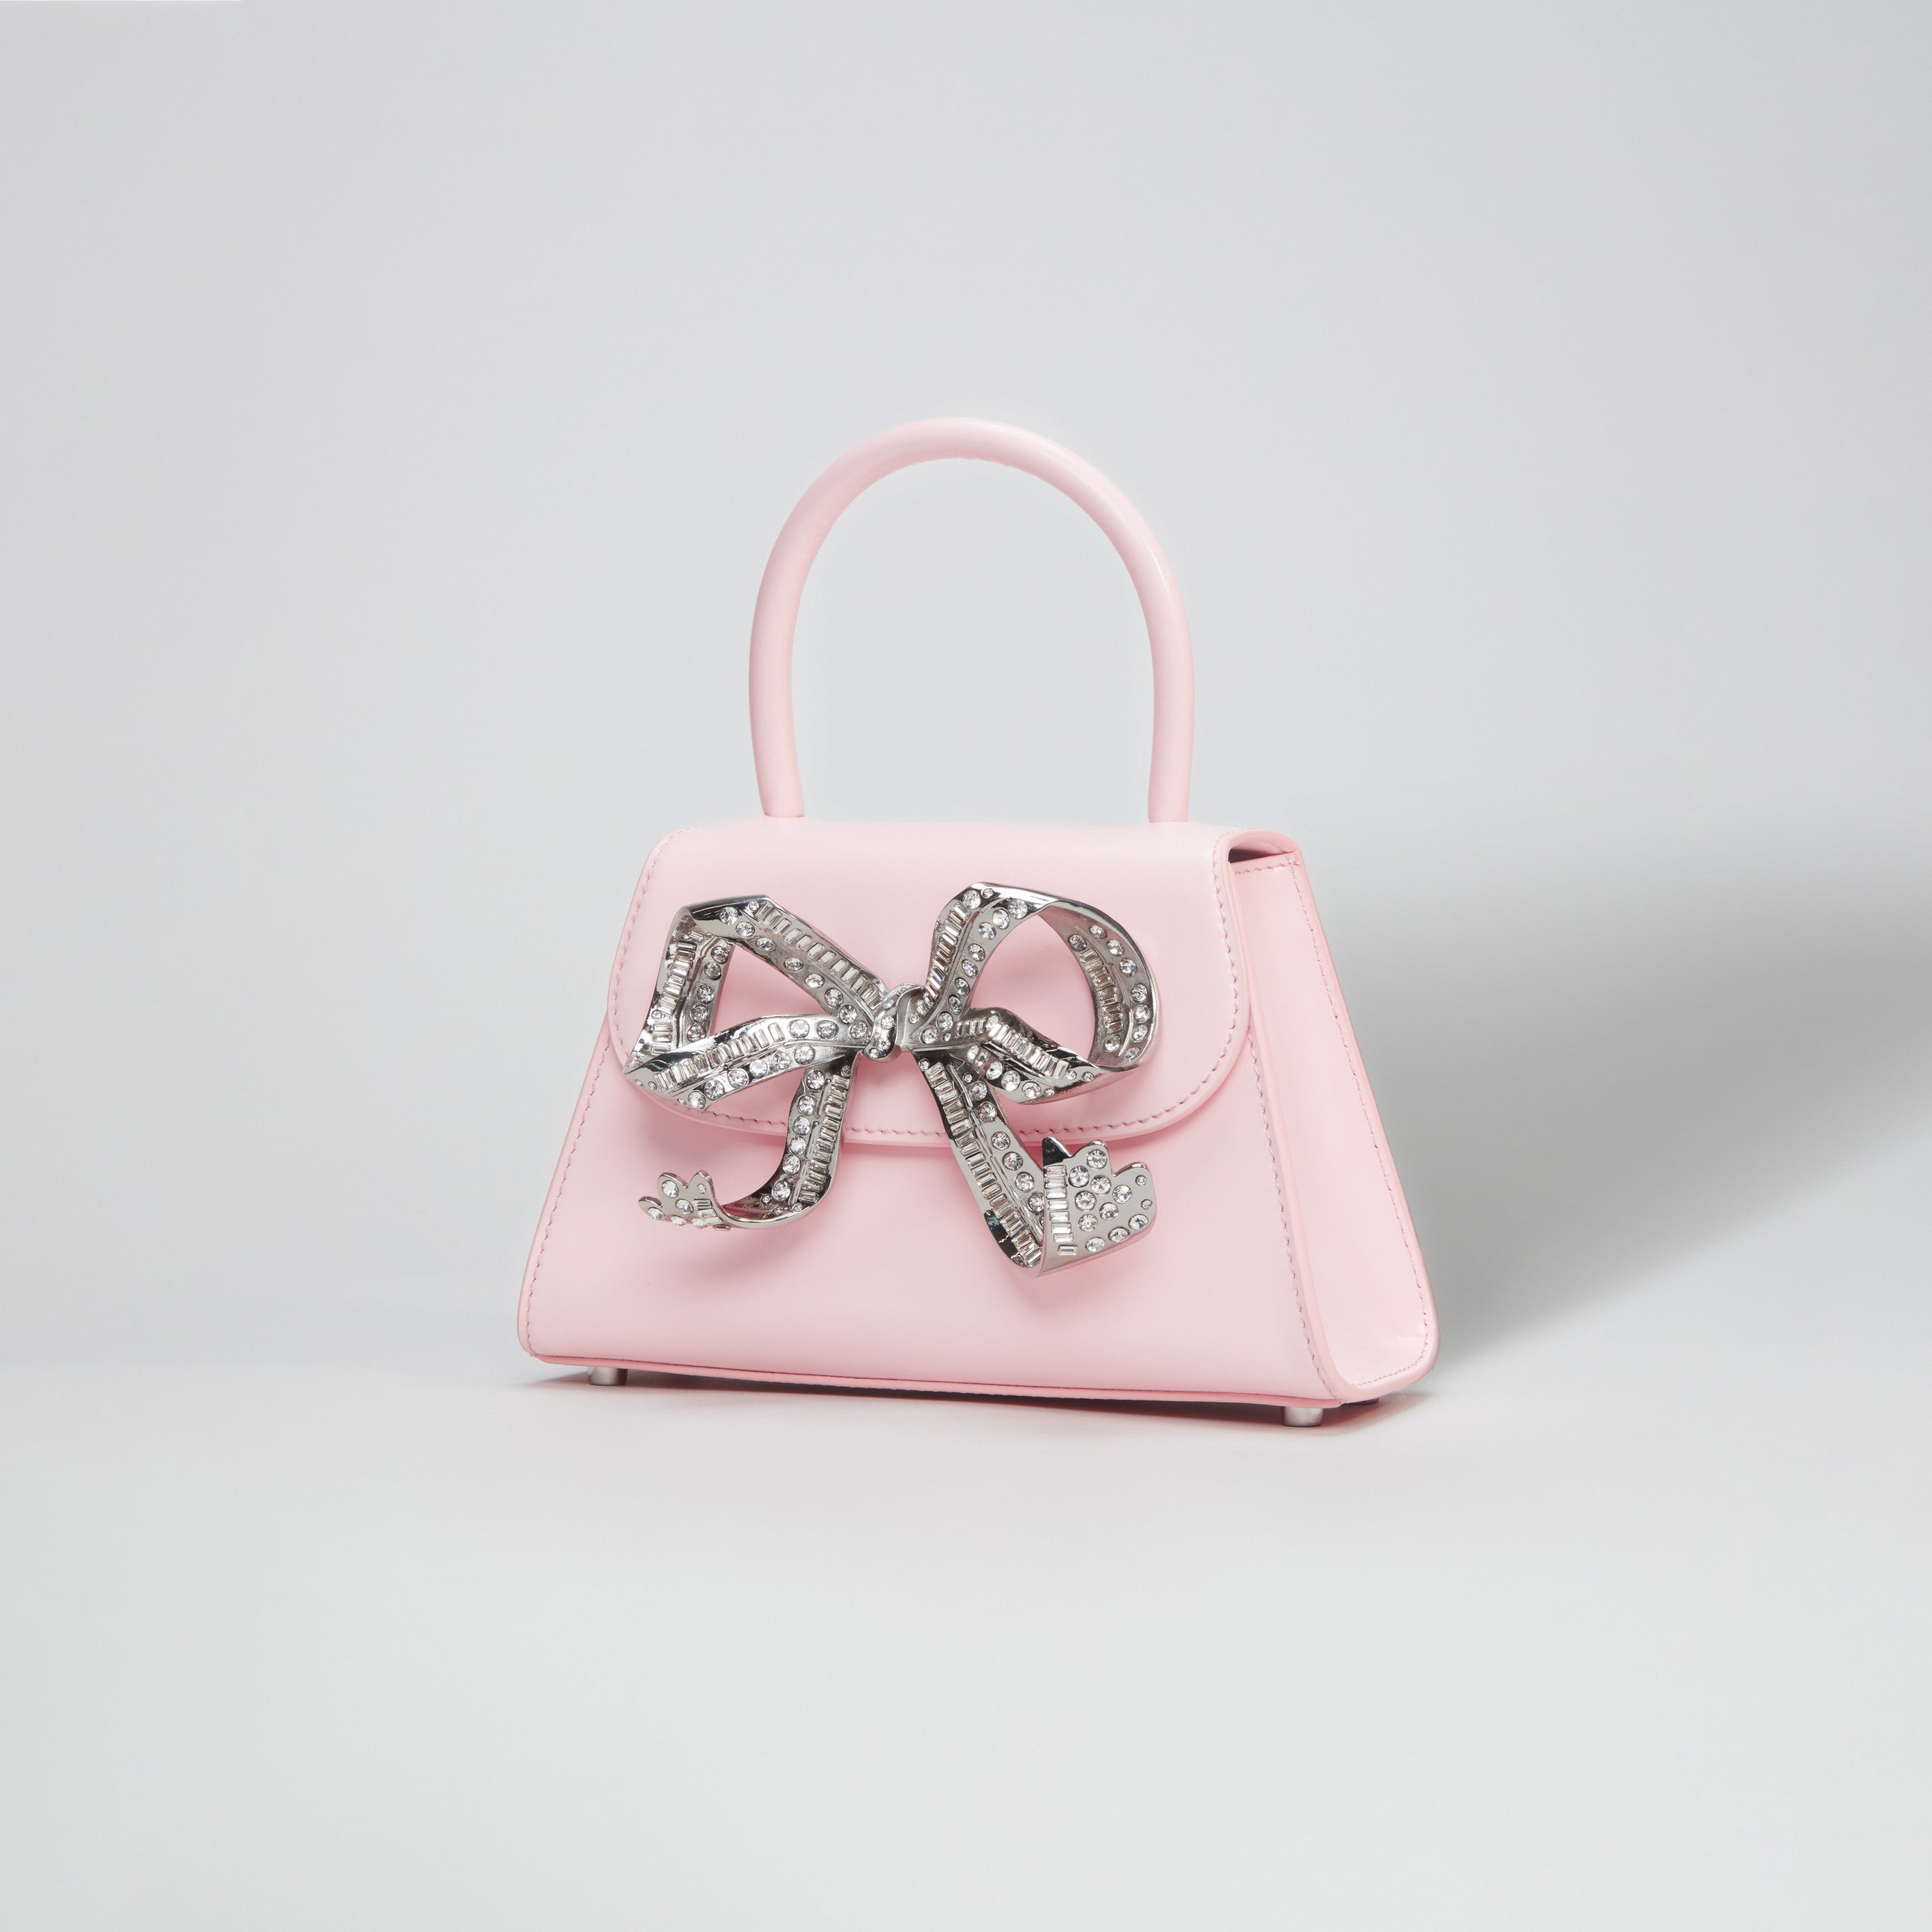 The Bow Mini in Pink with Diamanté – self-portrait